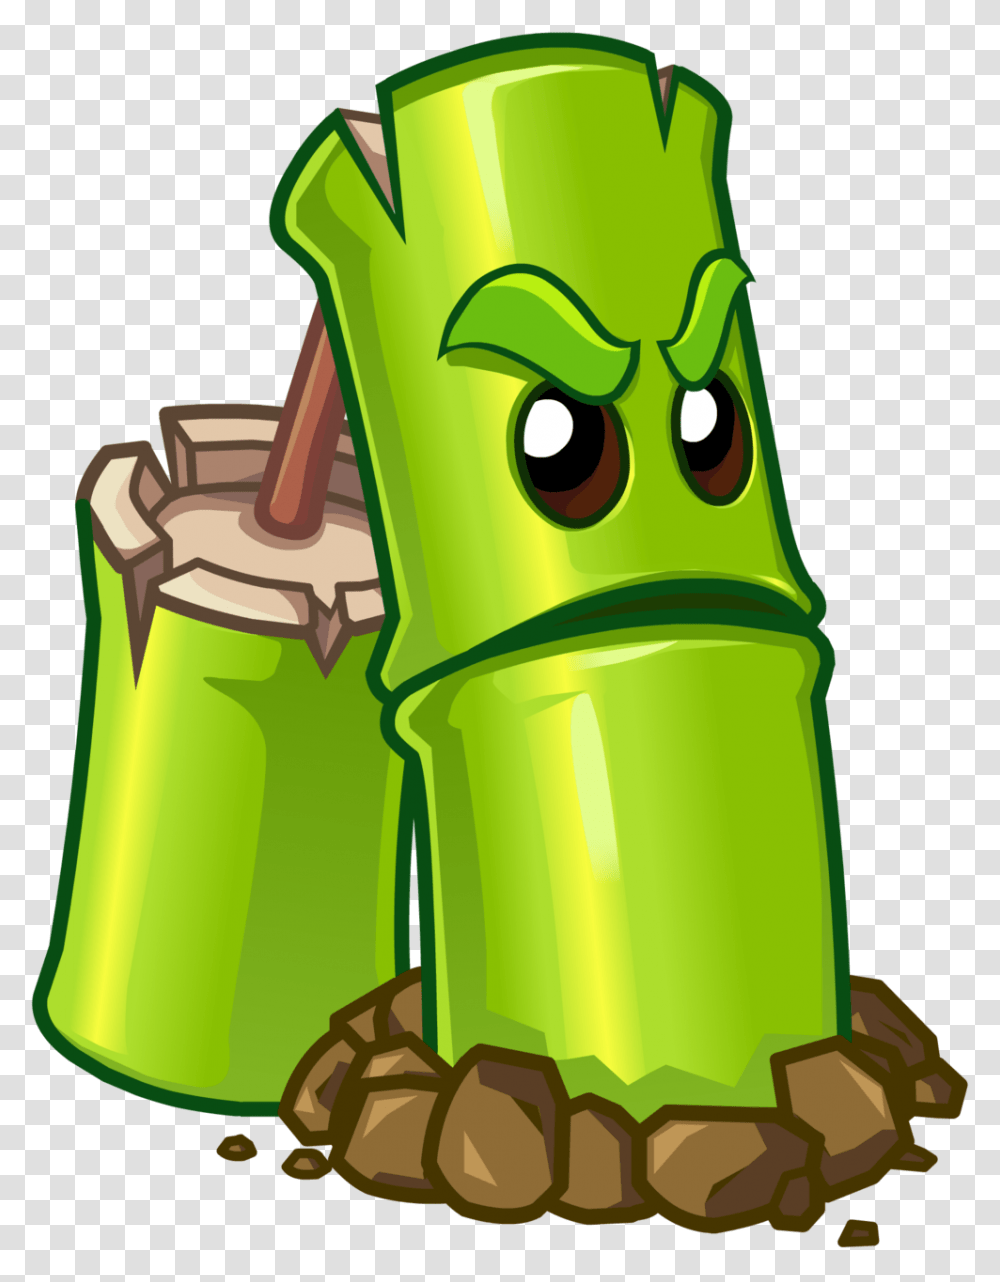 Zombies Wiki Plants Vs Zombies, Bottle, Green, Tin, Can Transparent Png